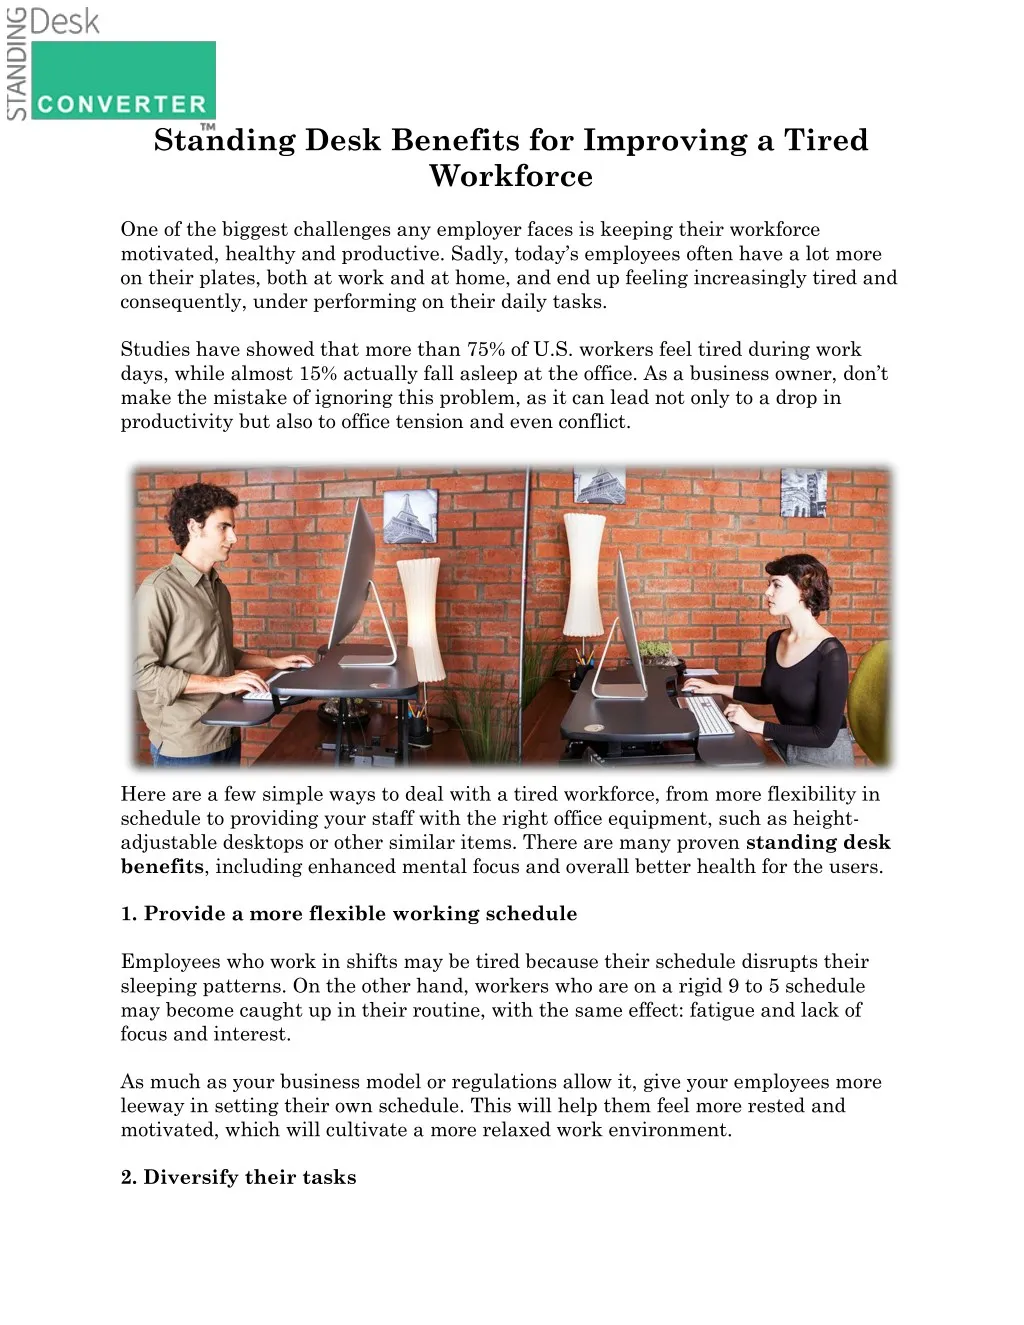 standing desk benefits for improving a tired